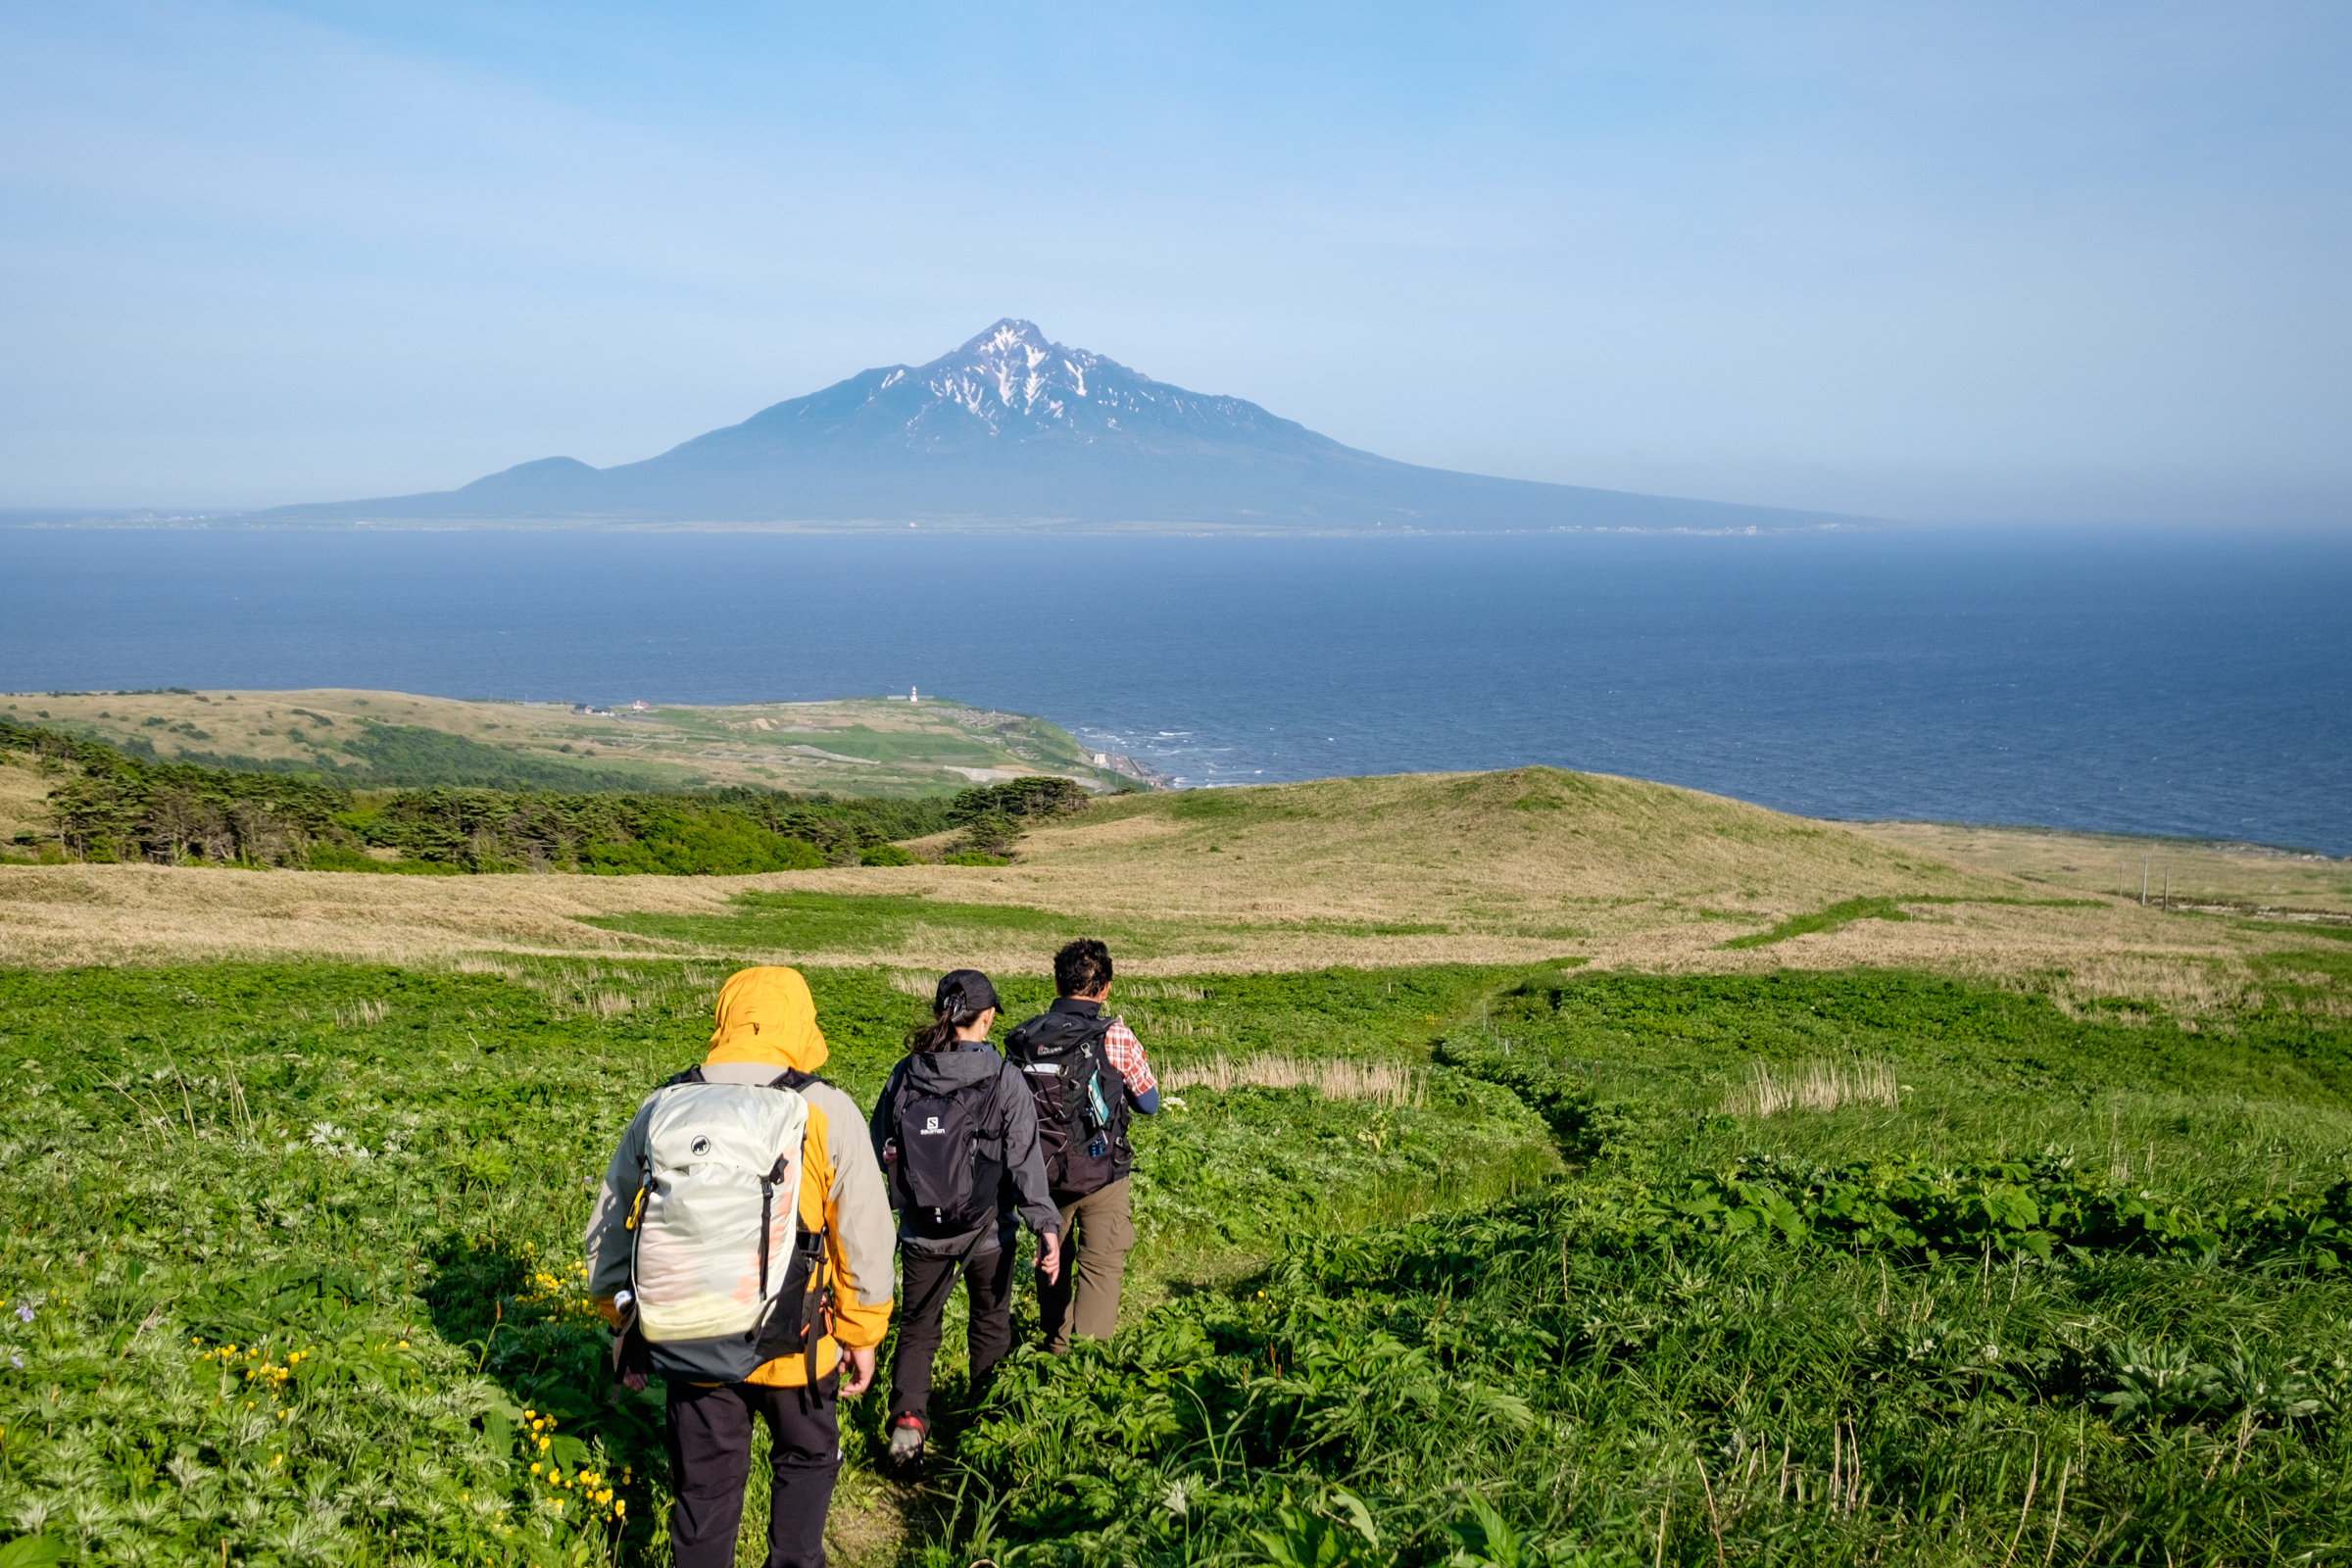 A group of hikers walk through low lying green vegetation on Rebun island. There are no trees and the hikers have an unrestricted view of Mt Rishiri across the sea.